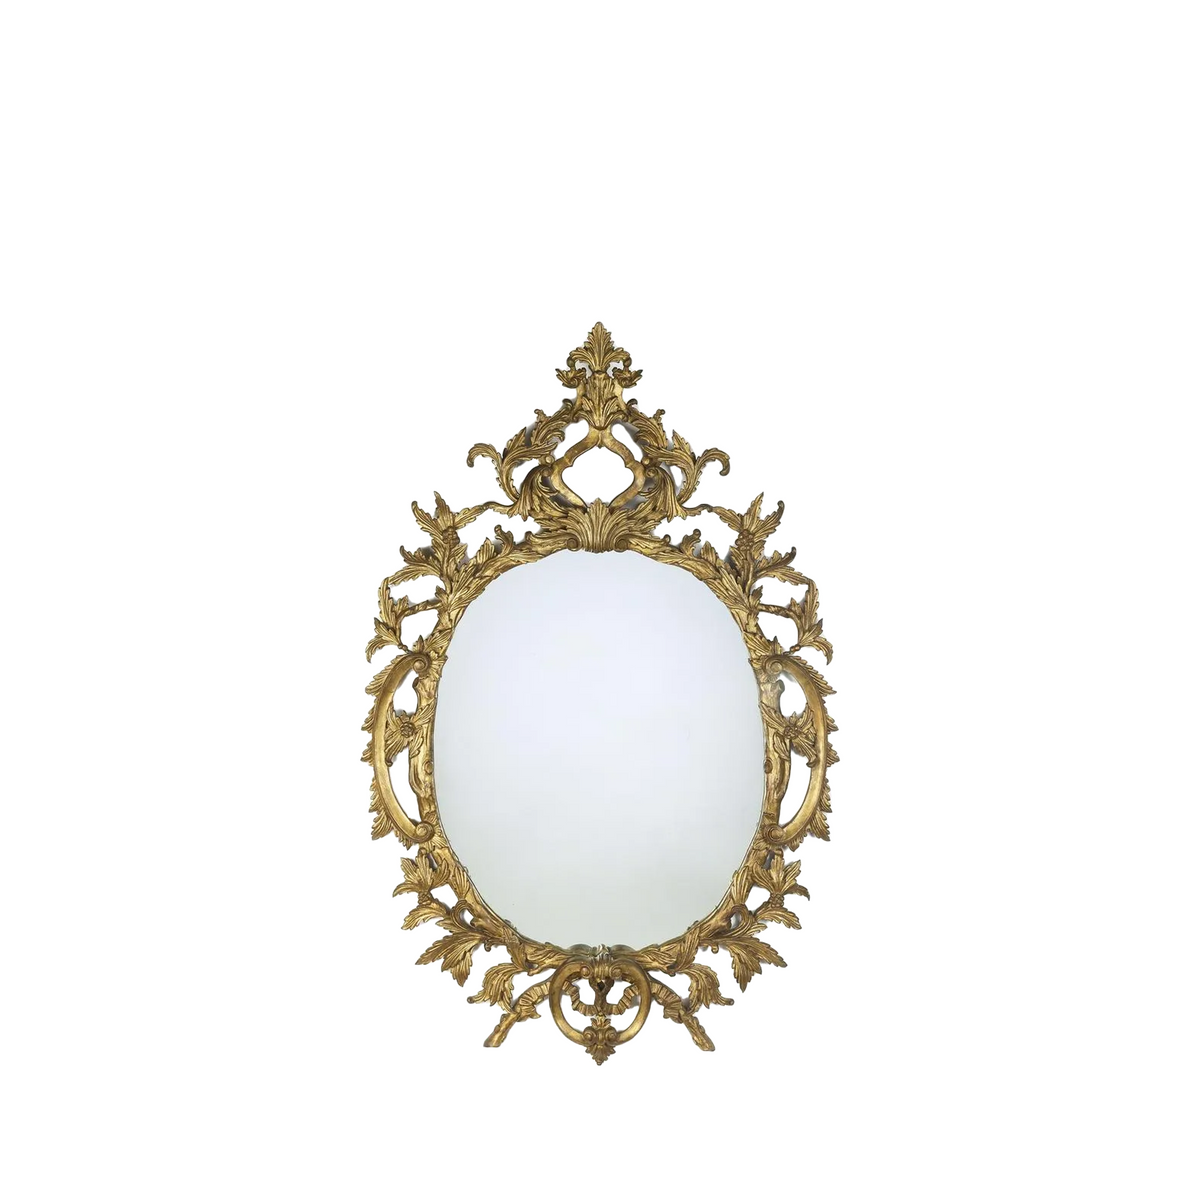 Early 20th Century Rococo Stye Giltwood and Gesso Mirror